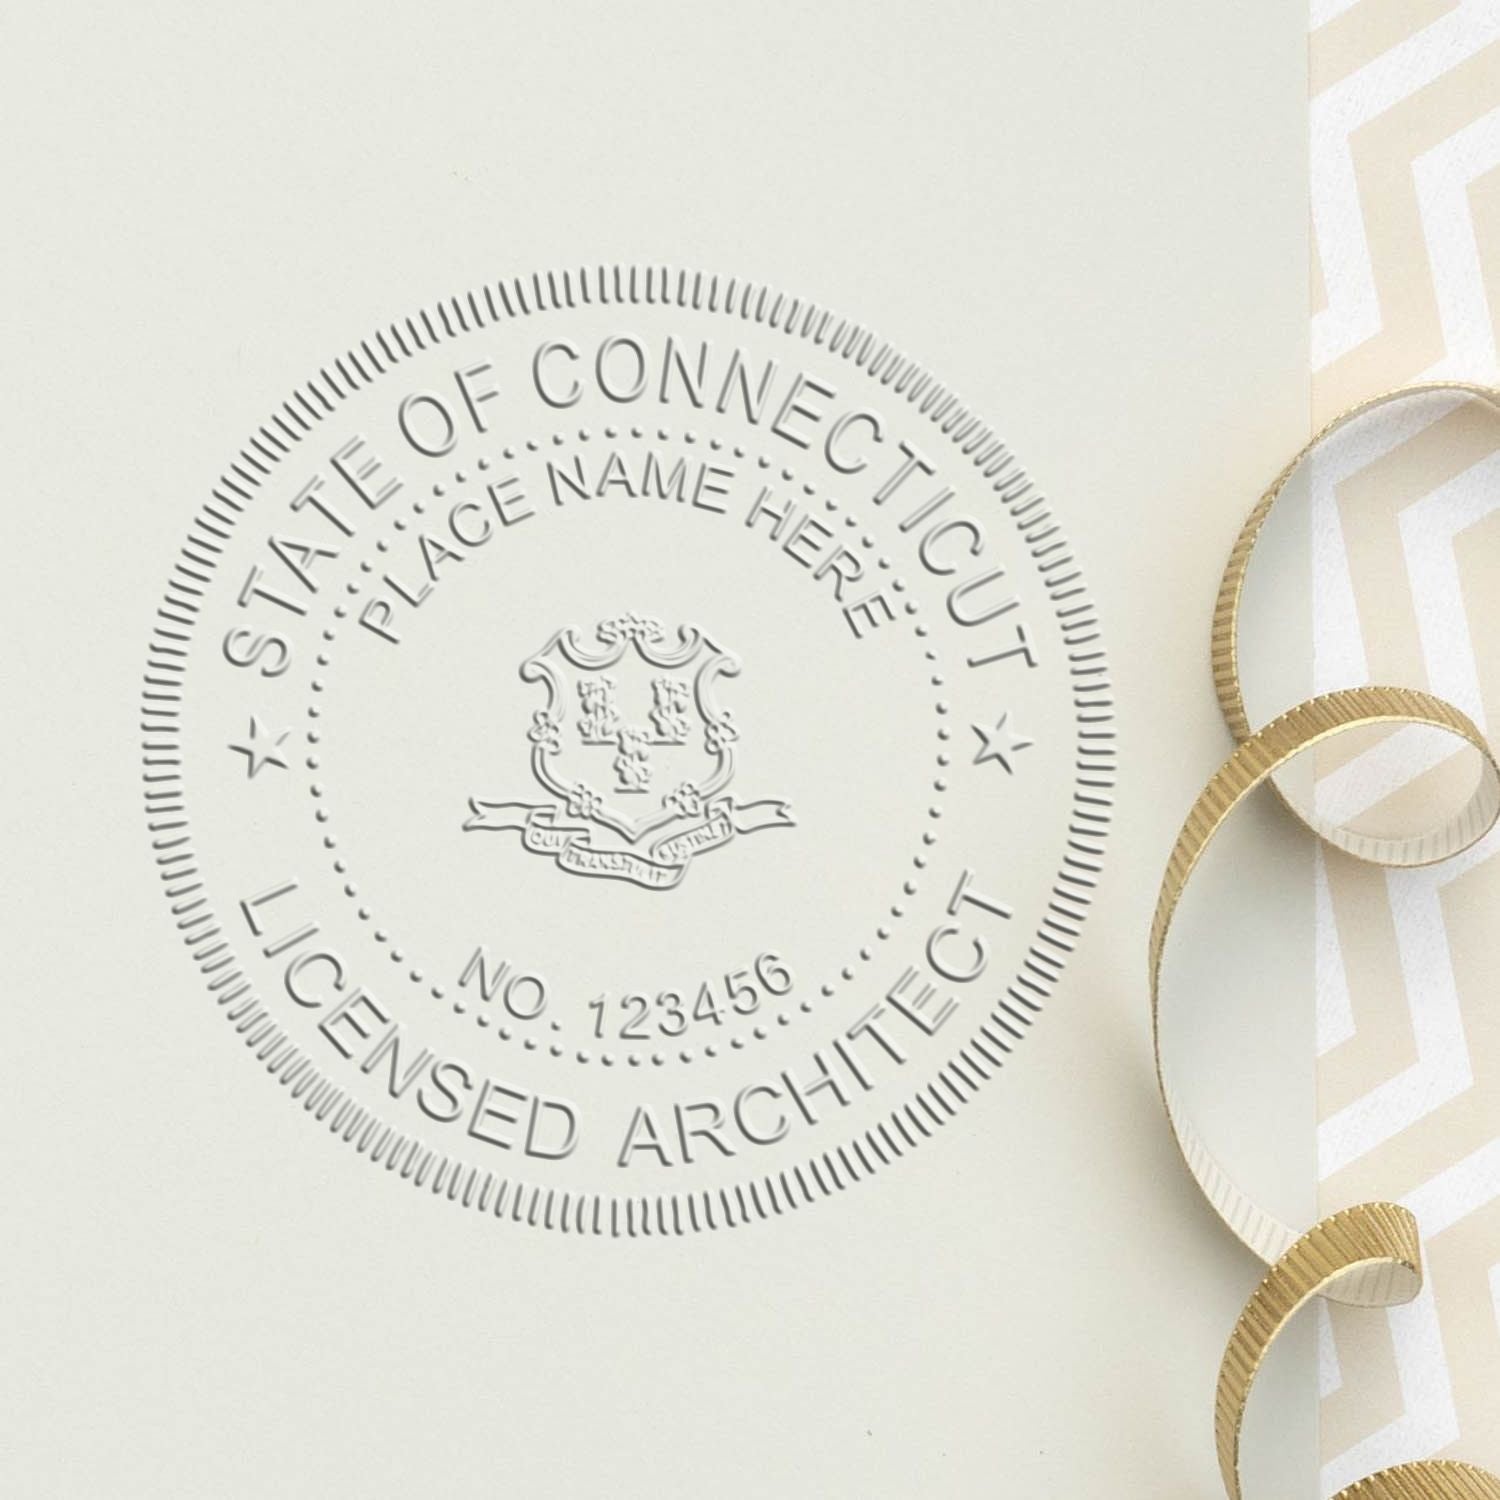 The main image for the Connecticut Desk Architect Embossing Seal depicting a sample of the imprint and electronic files